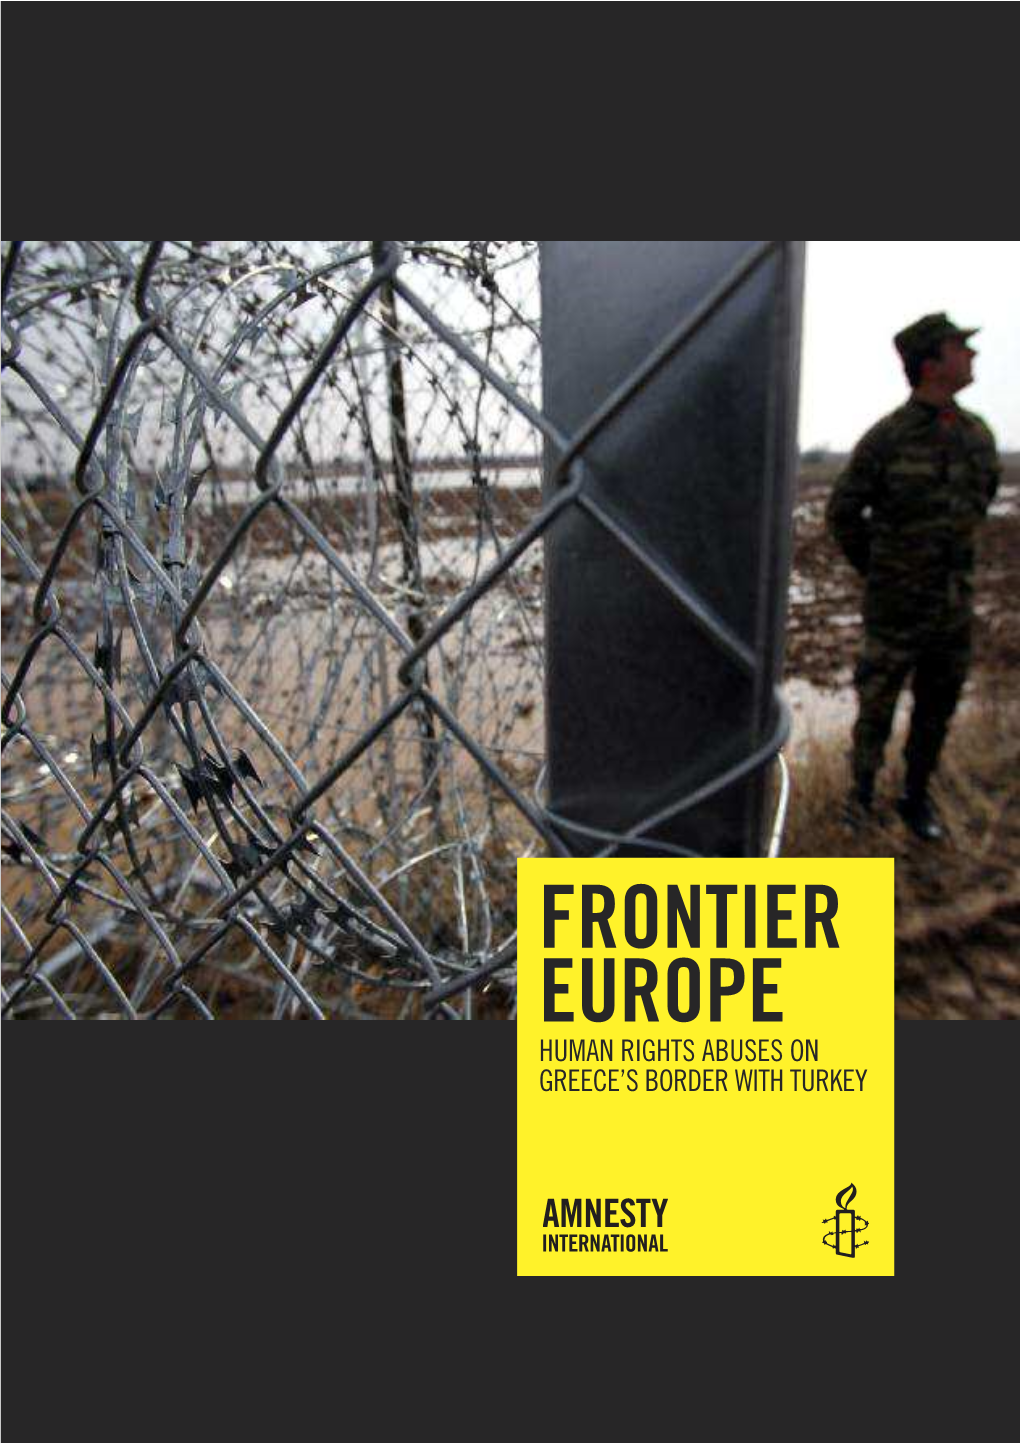 Human Rights Abuses on Greece's Border with Turkey